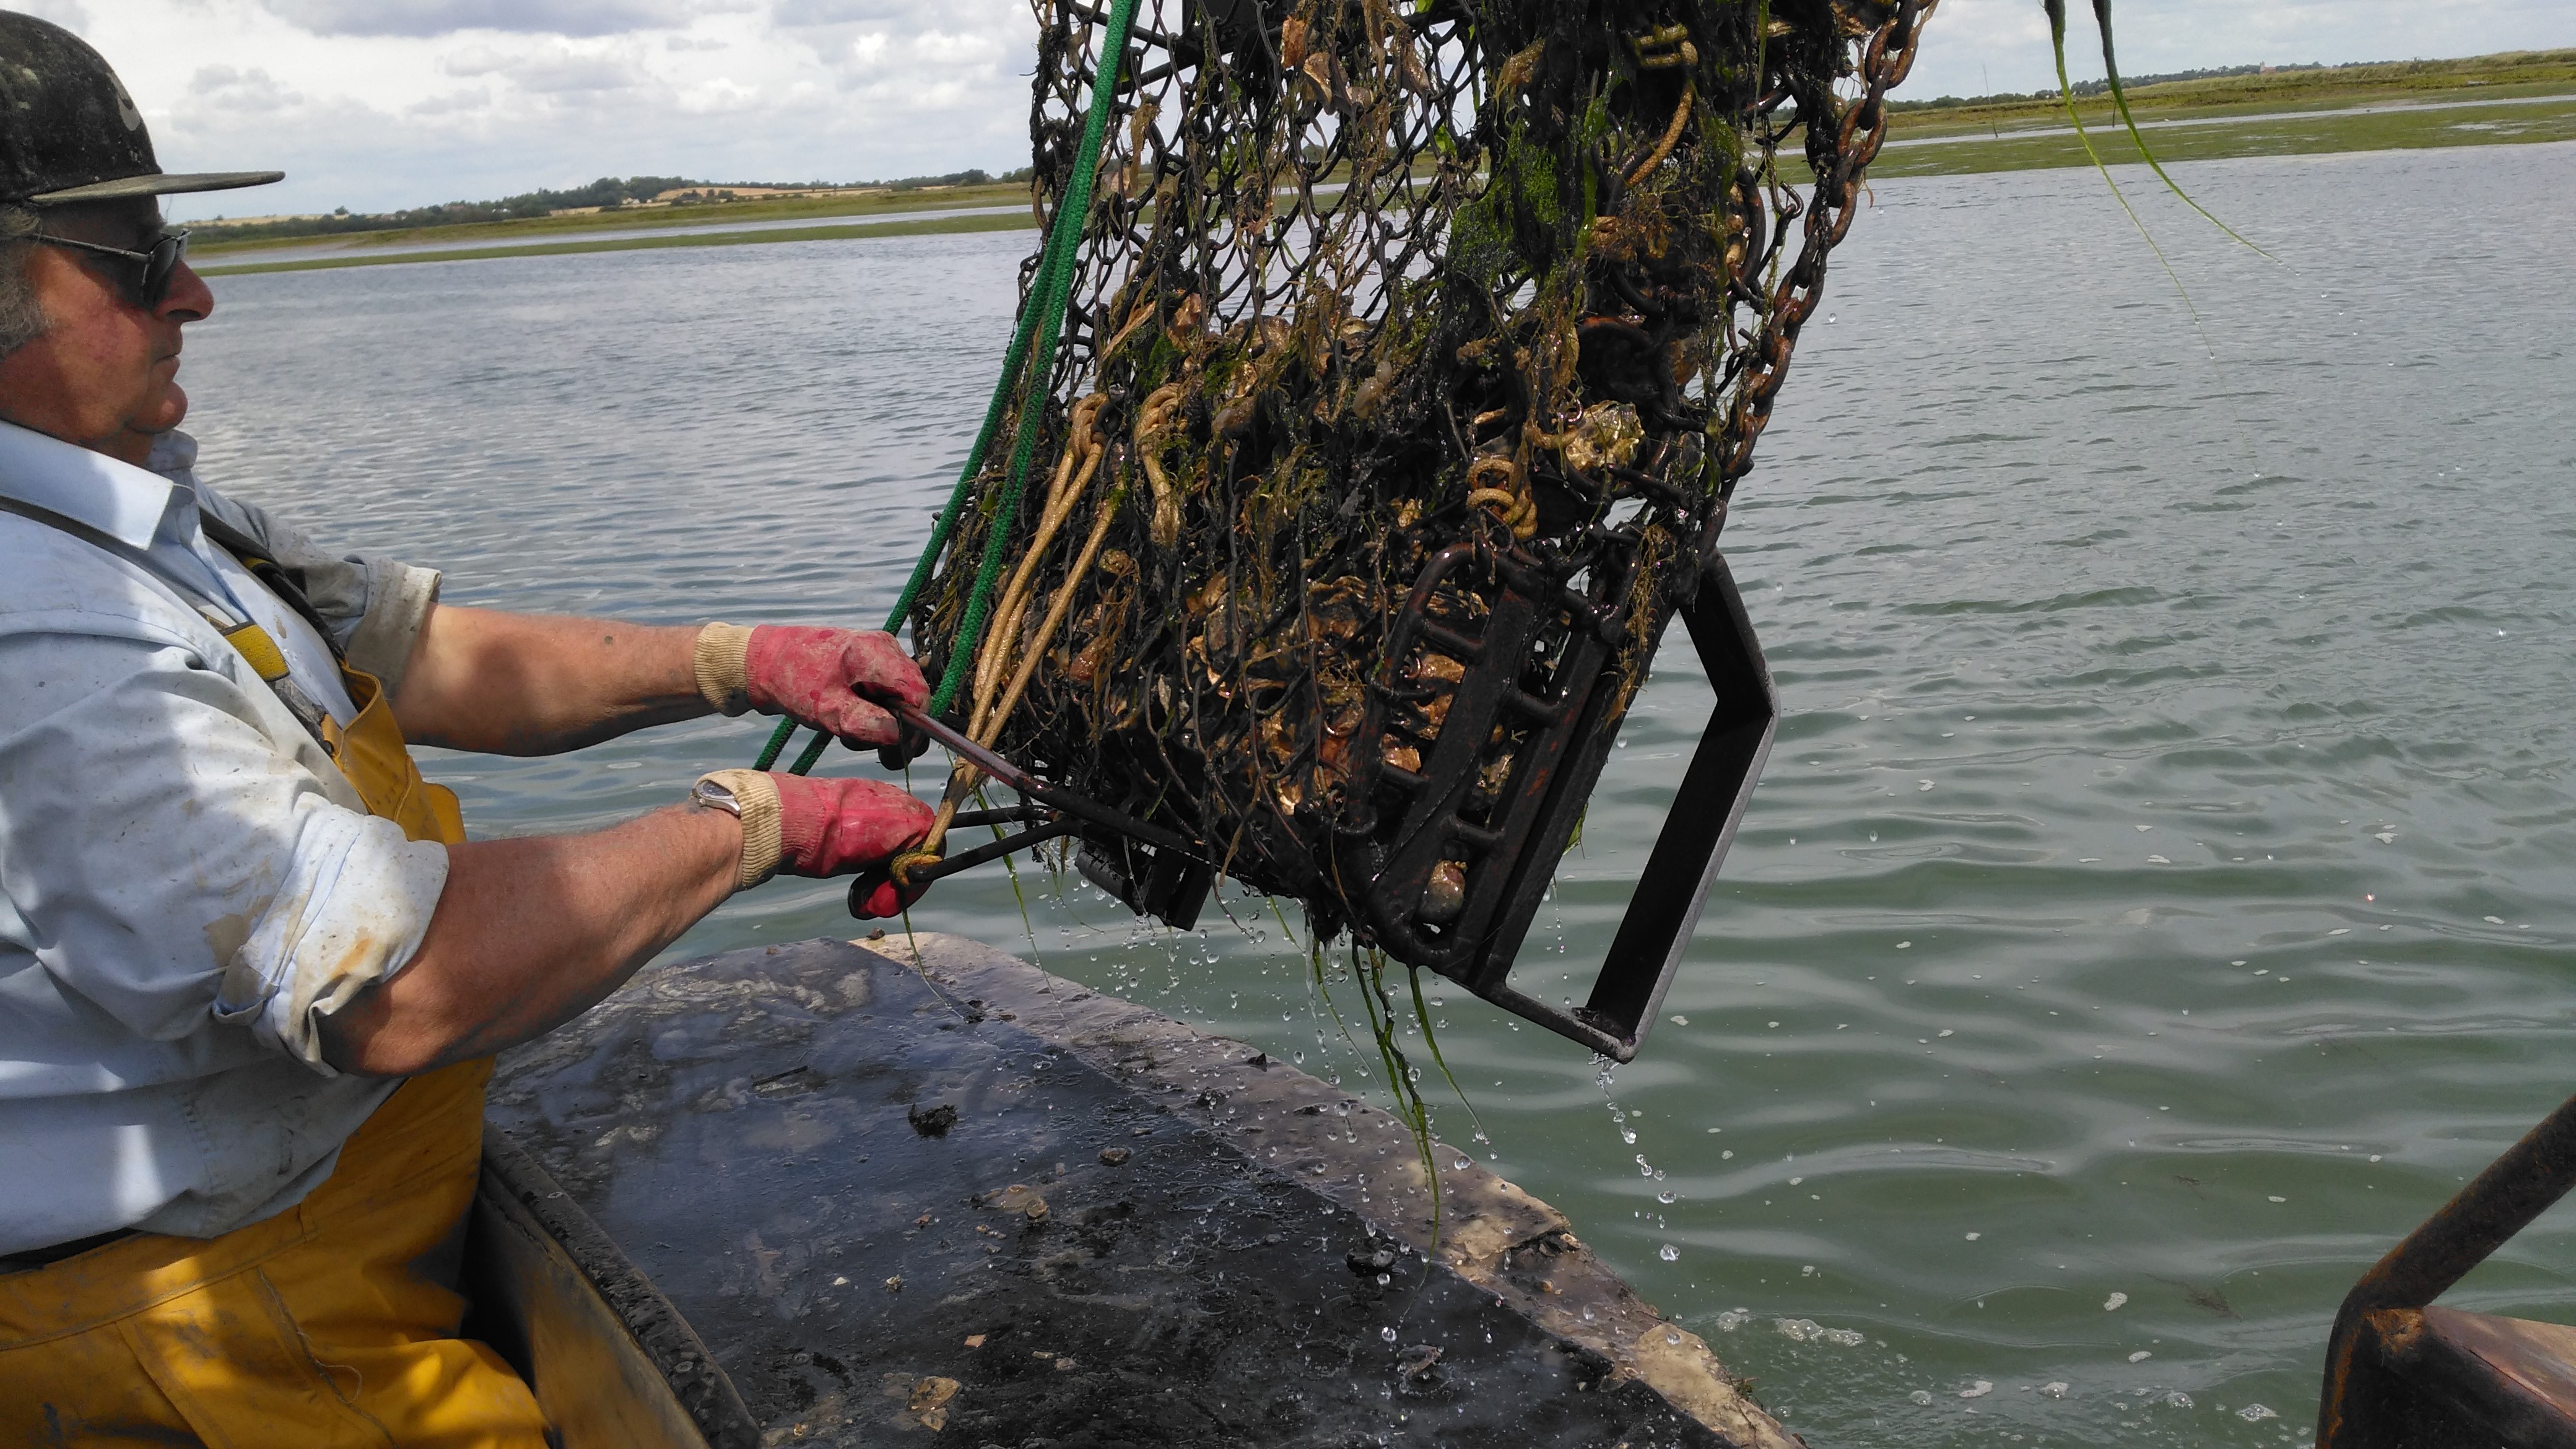 Hauling in rock and native oysters